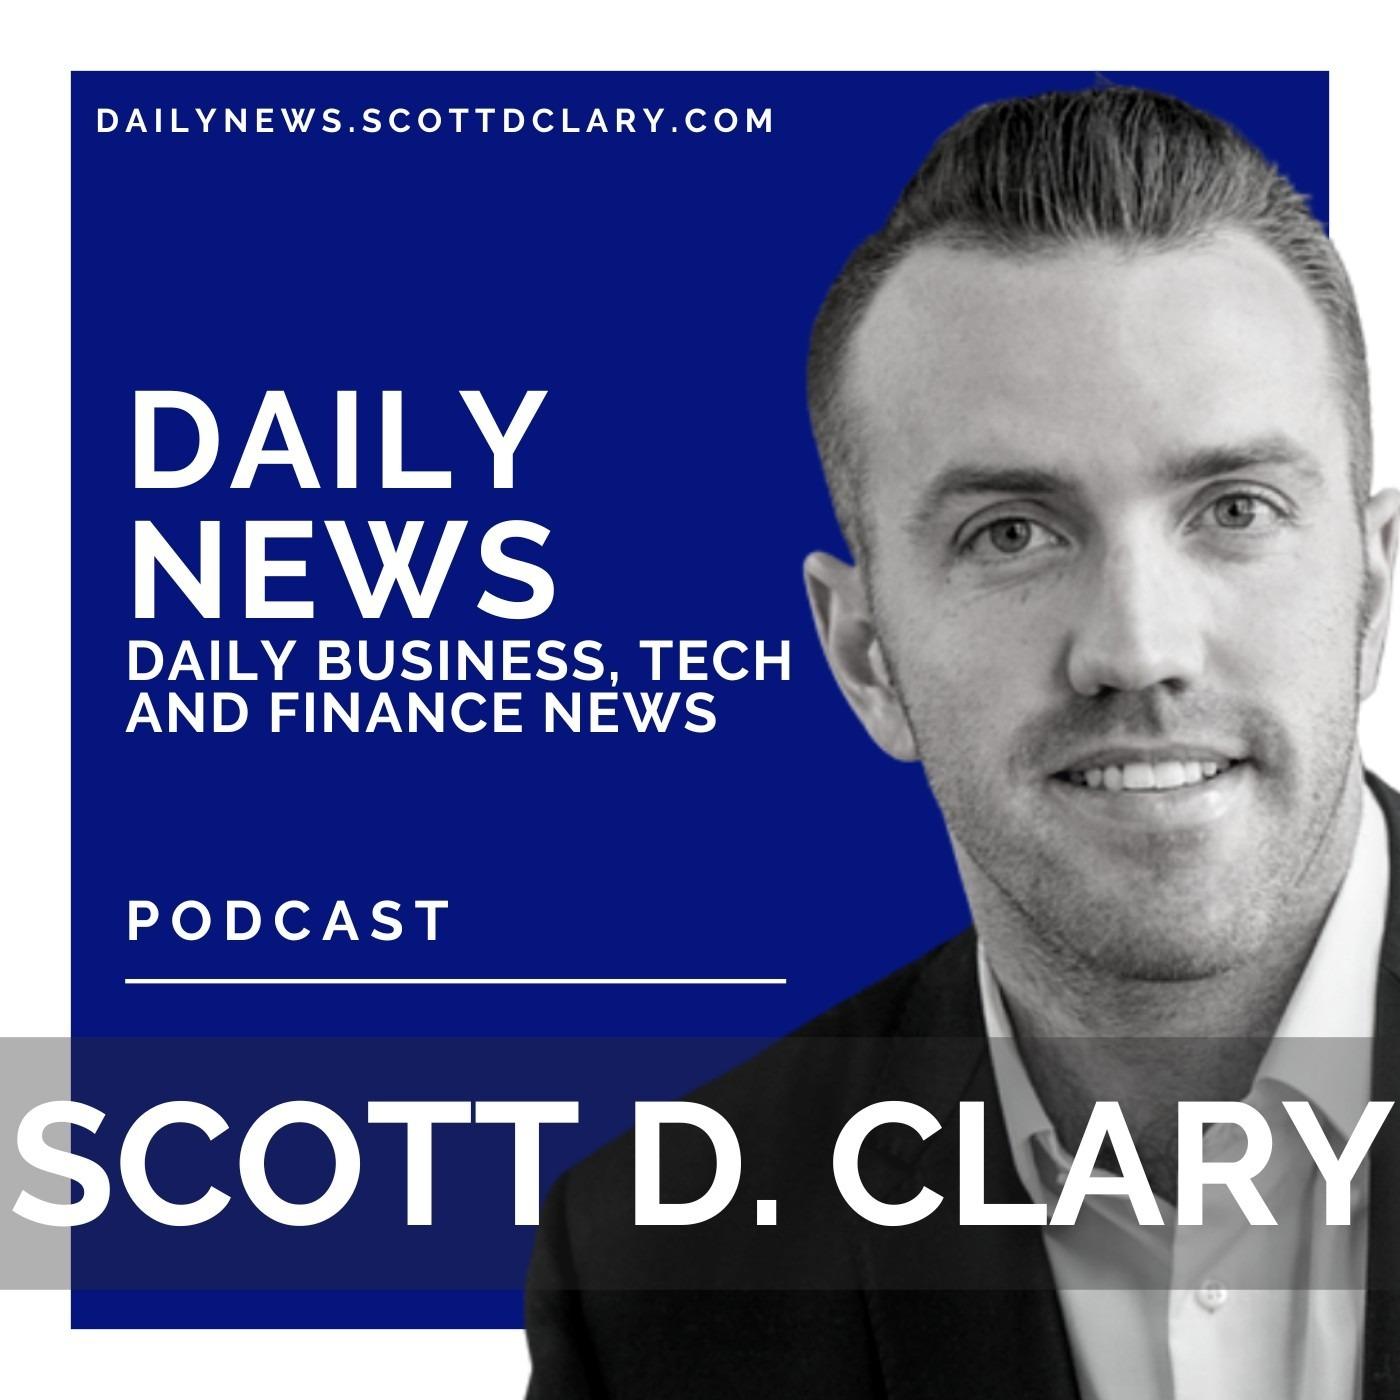 Daily News - Daily Business, Tech, Finance & Startup News With Scott D. Clary